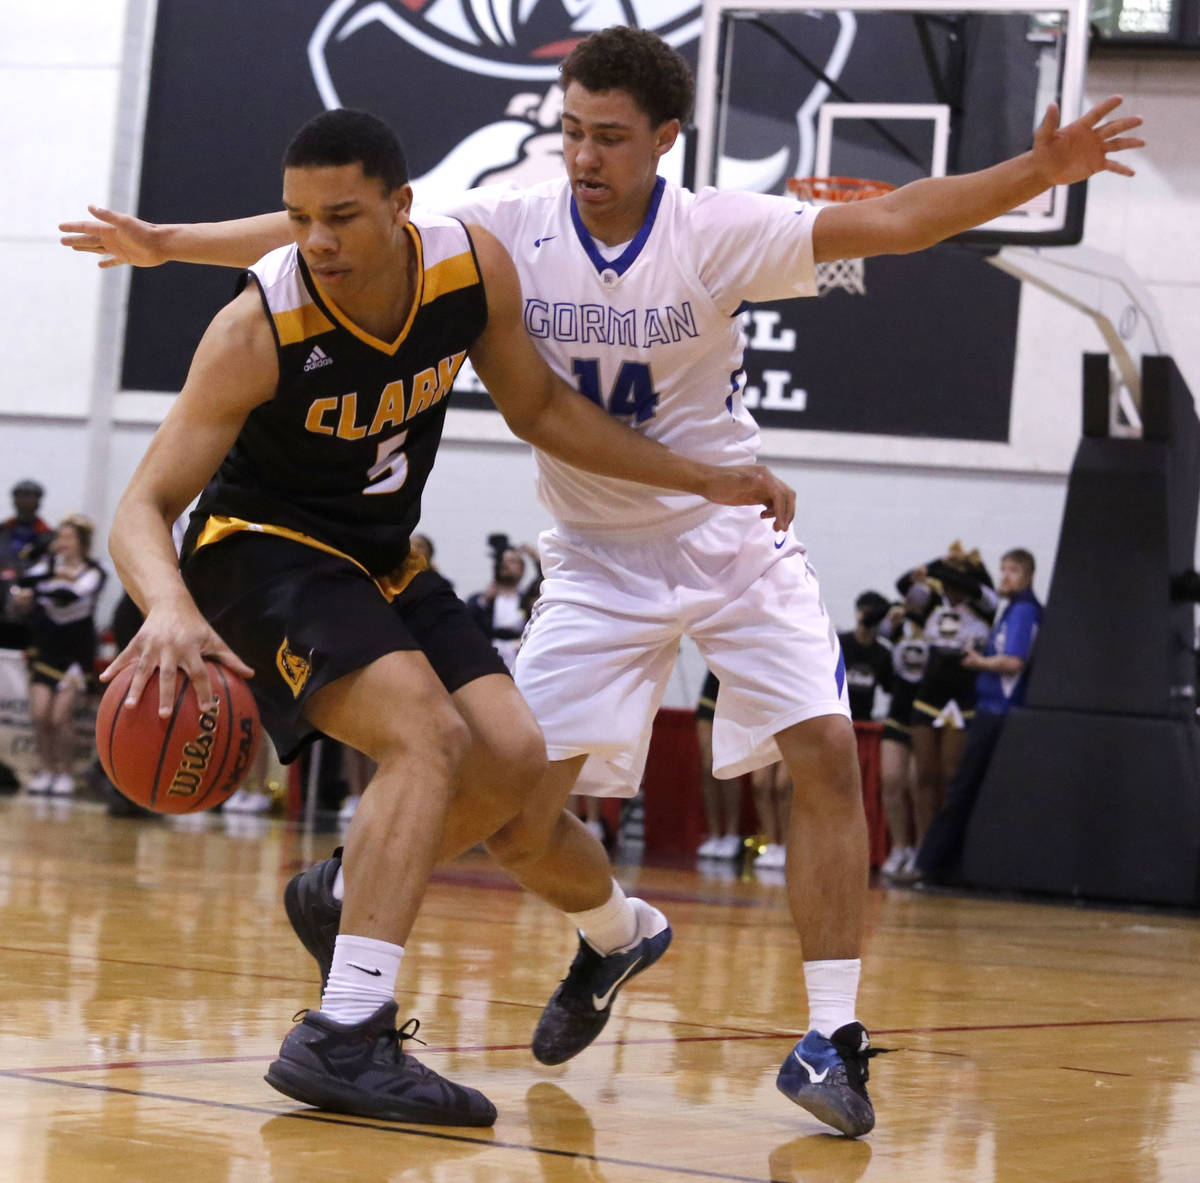 Clark's Deshawn Wilson (5) dribbles against Bishop Gorman's Saxton Howard (14) during the secon ...